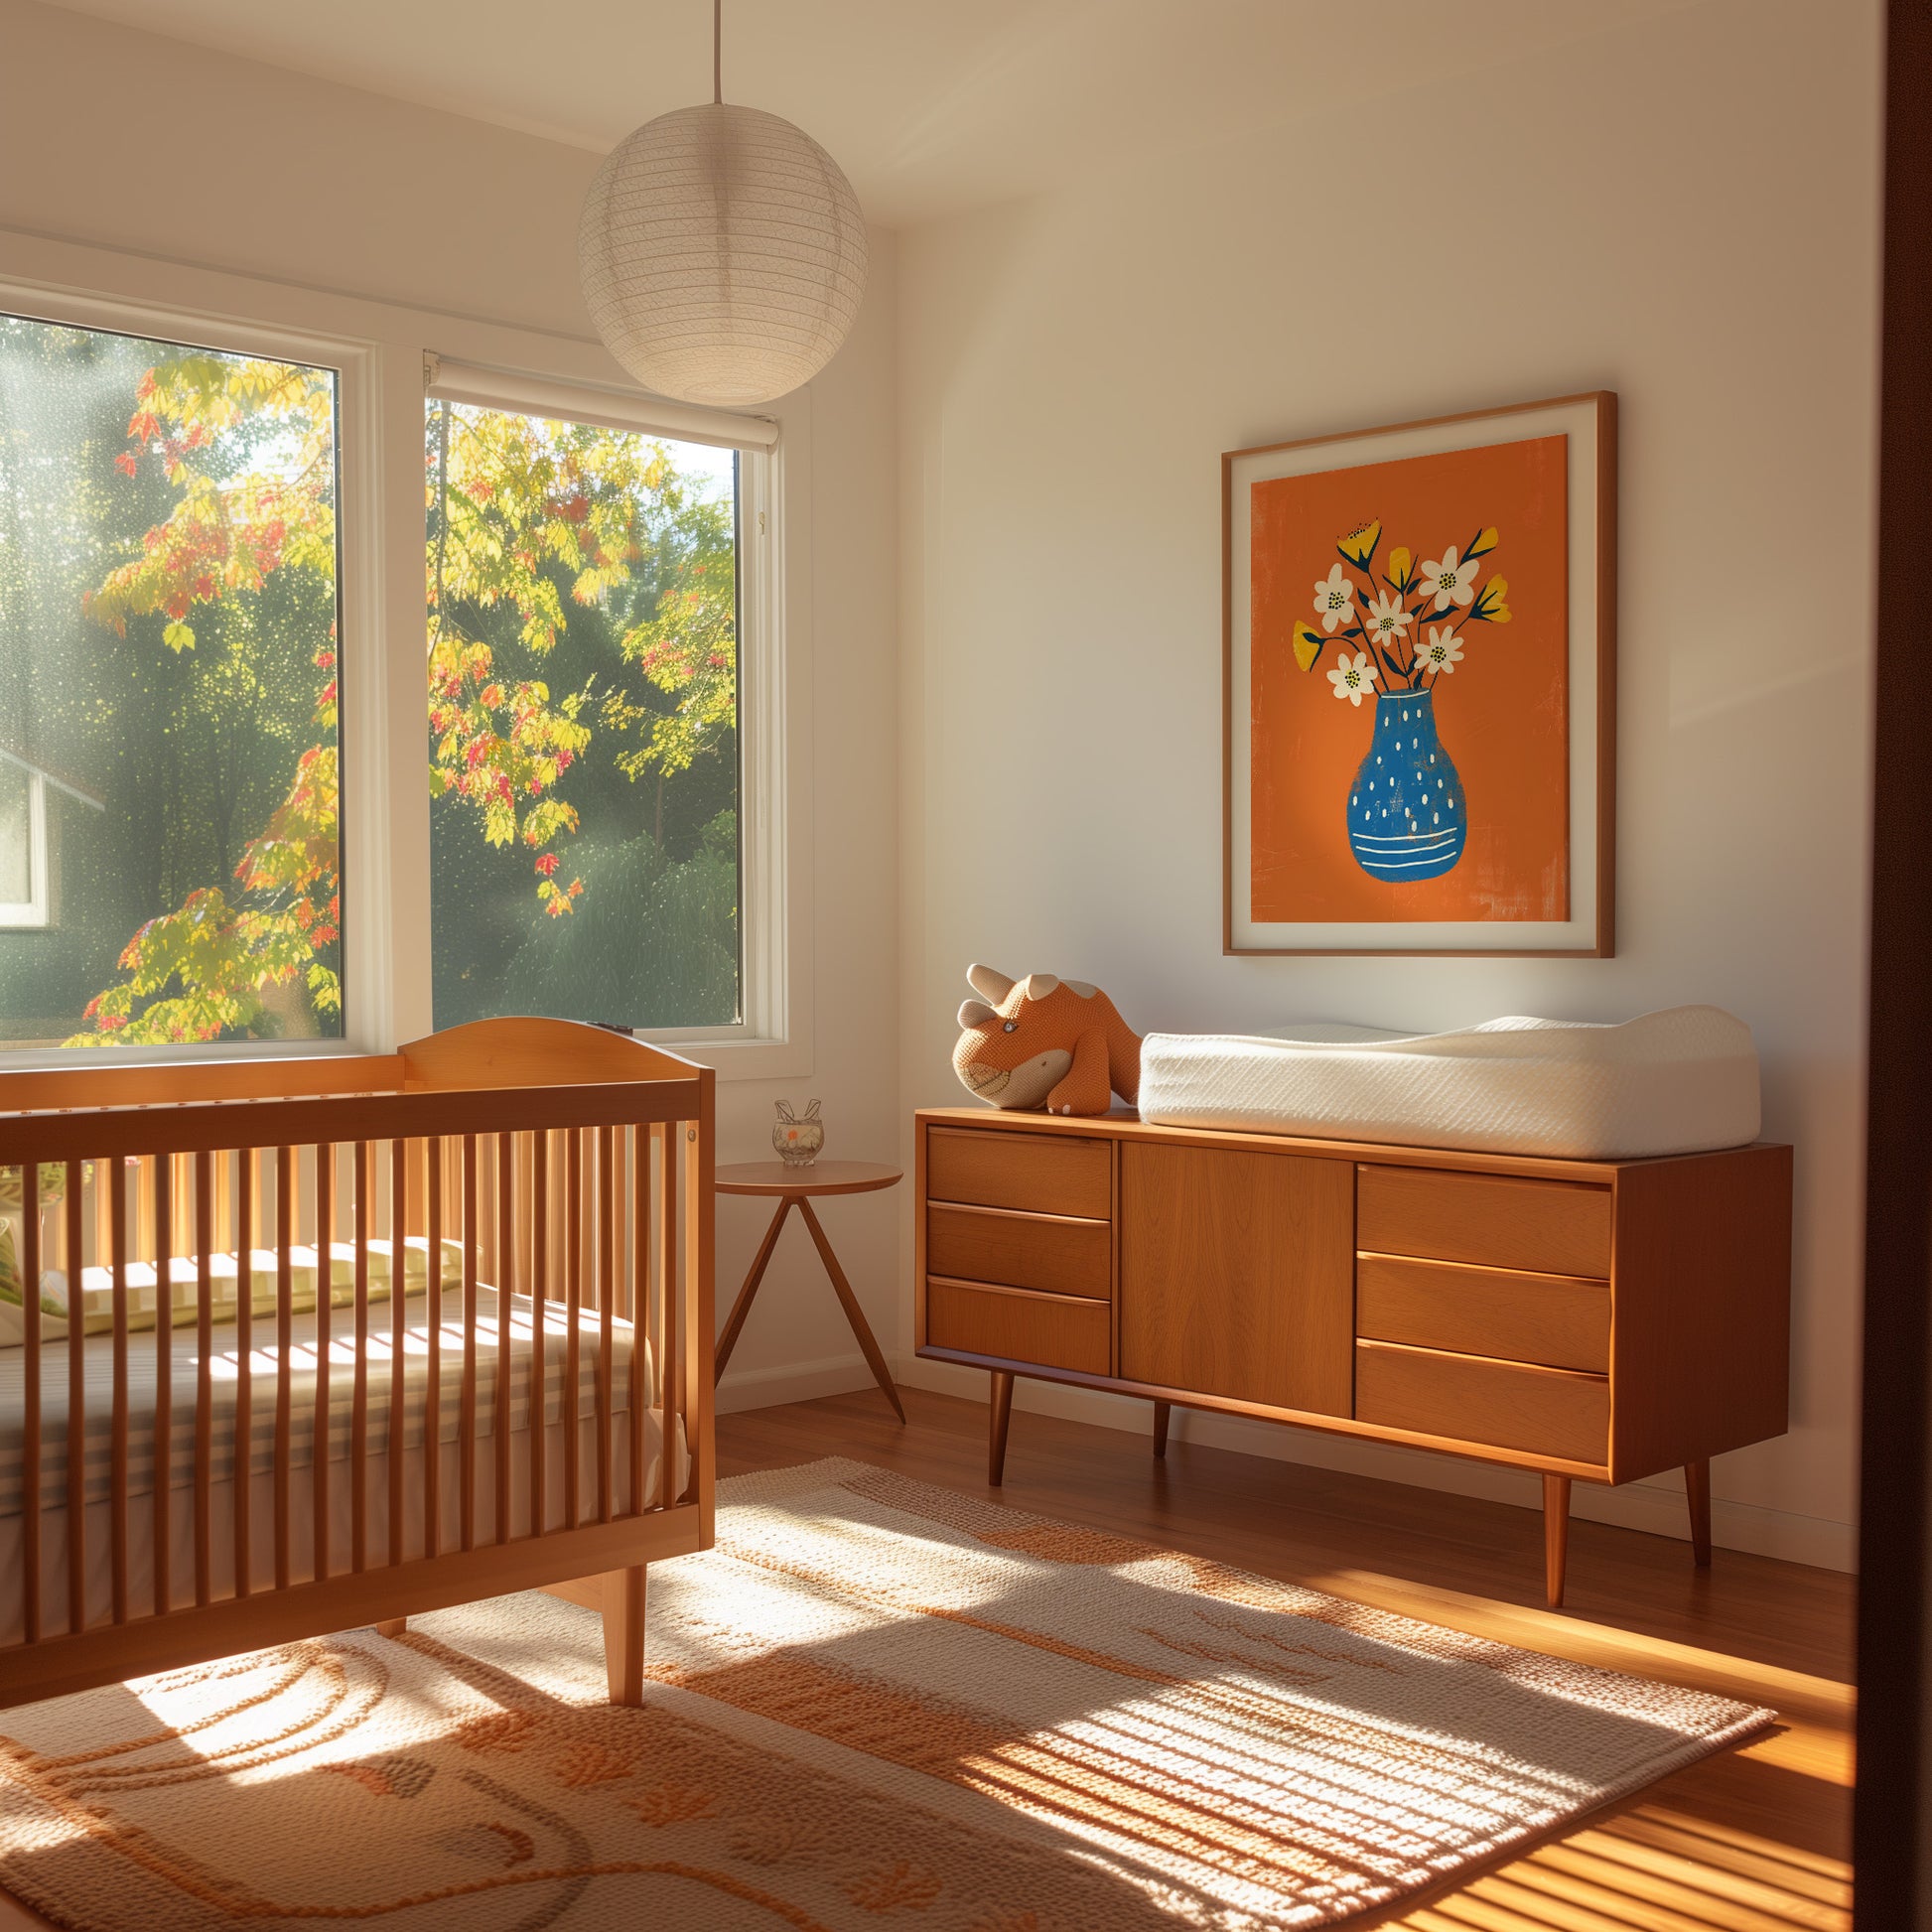 A cozy bedroom with a wooden bed and dresser, warm sunlight, and autumn trees visible outside the window.